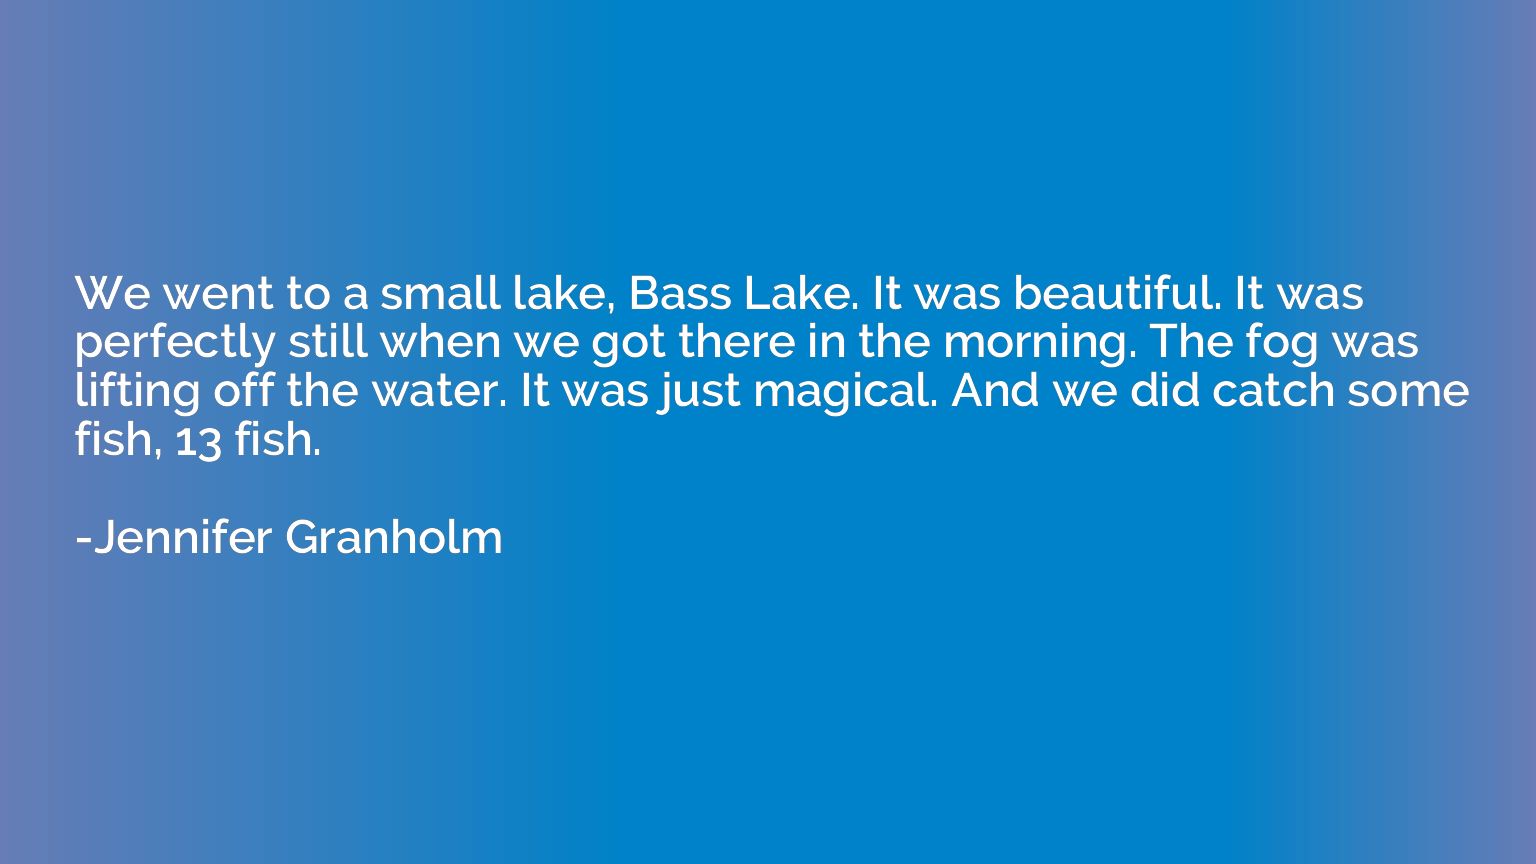 We went to a small lake, Bass Lake. It was beautiful. It was